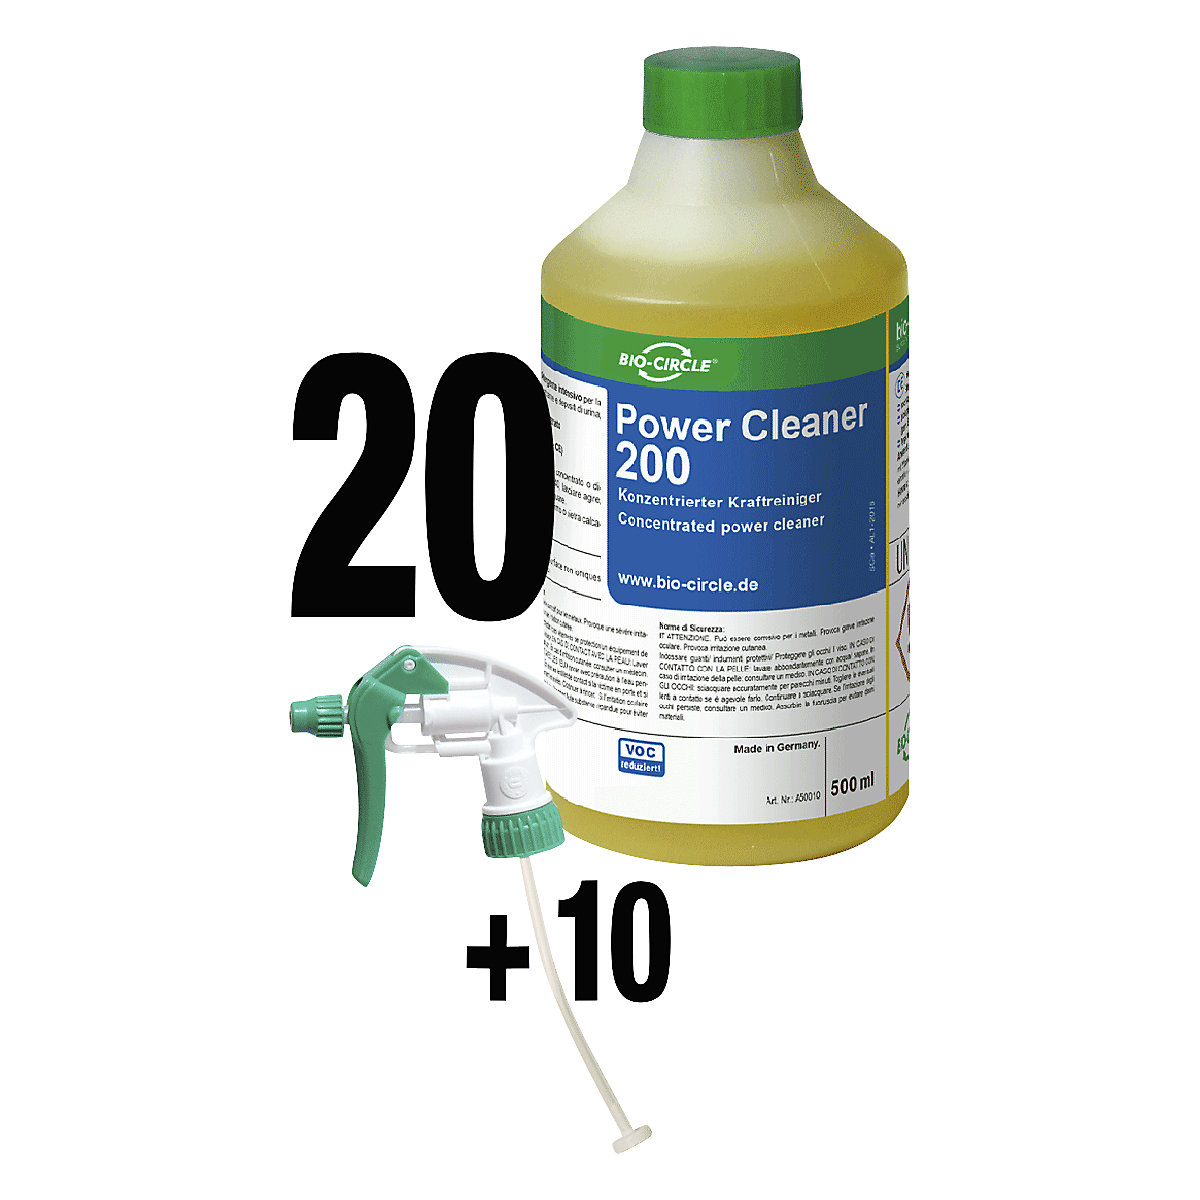 Power Cleaner 200 intensive cleaning concentrate – Bio-Circle